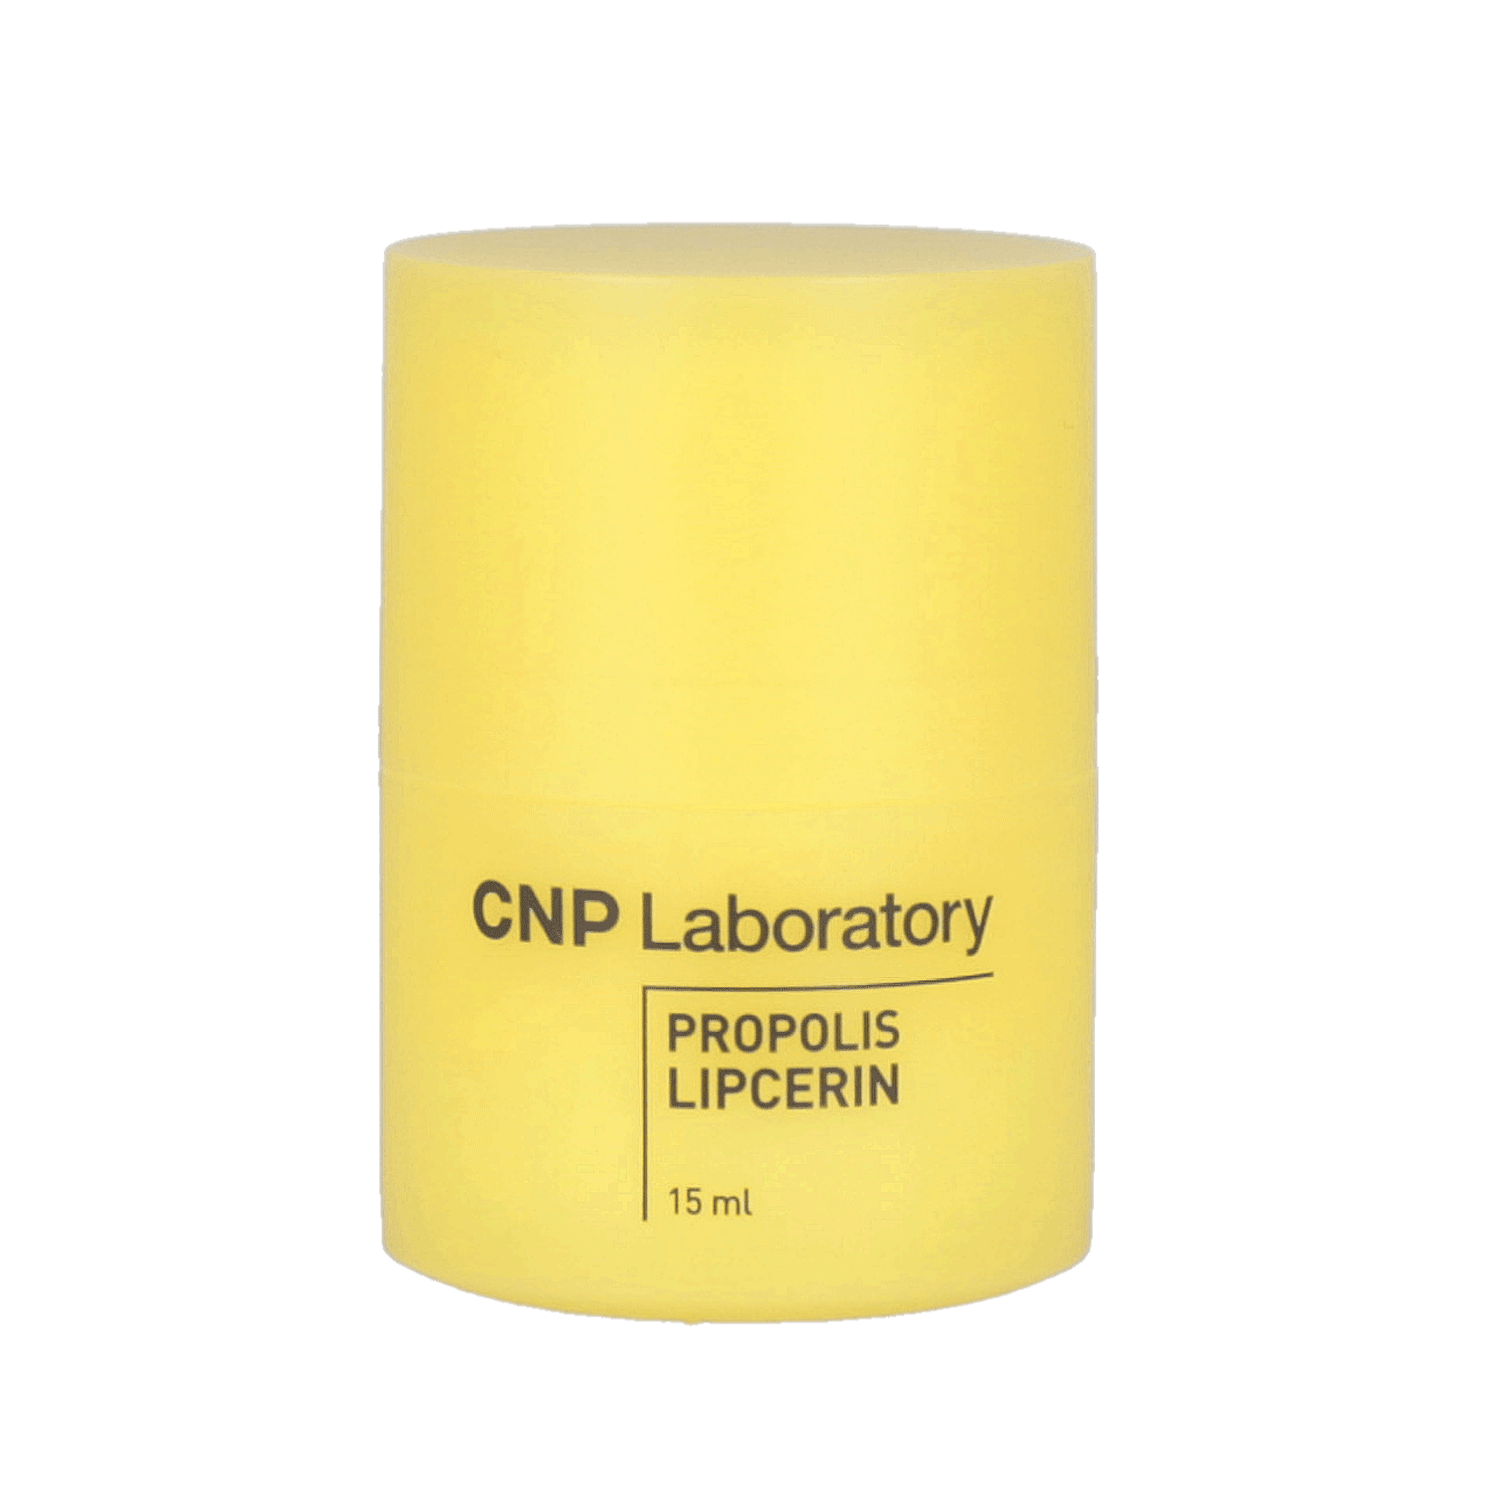 CNP Laboratory Propolis Lipcerin 15ml bottle with yellow label and black cap.